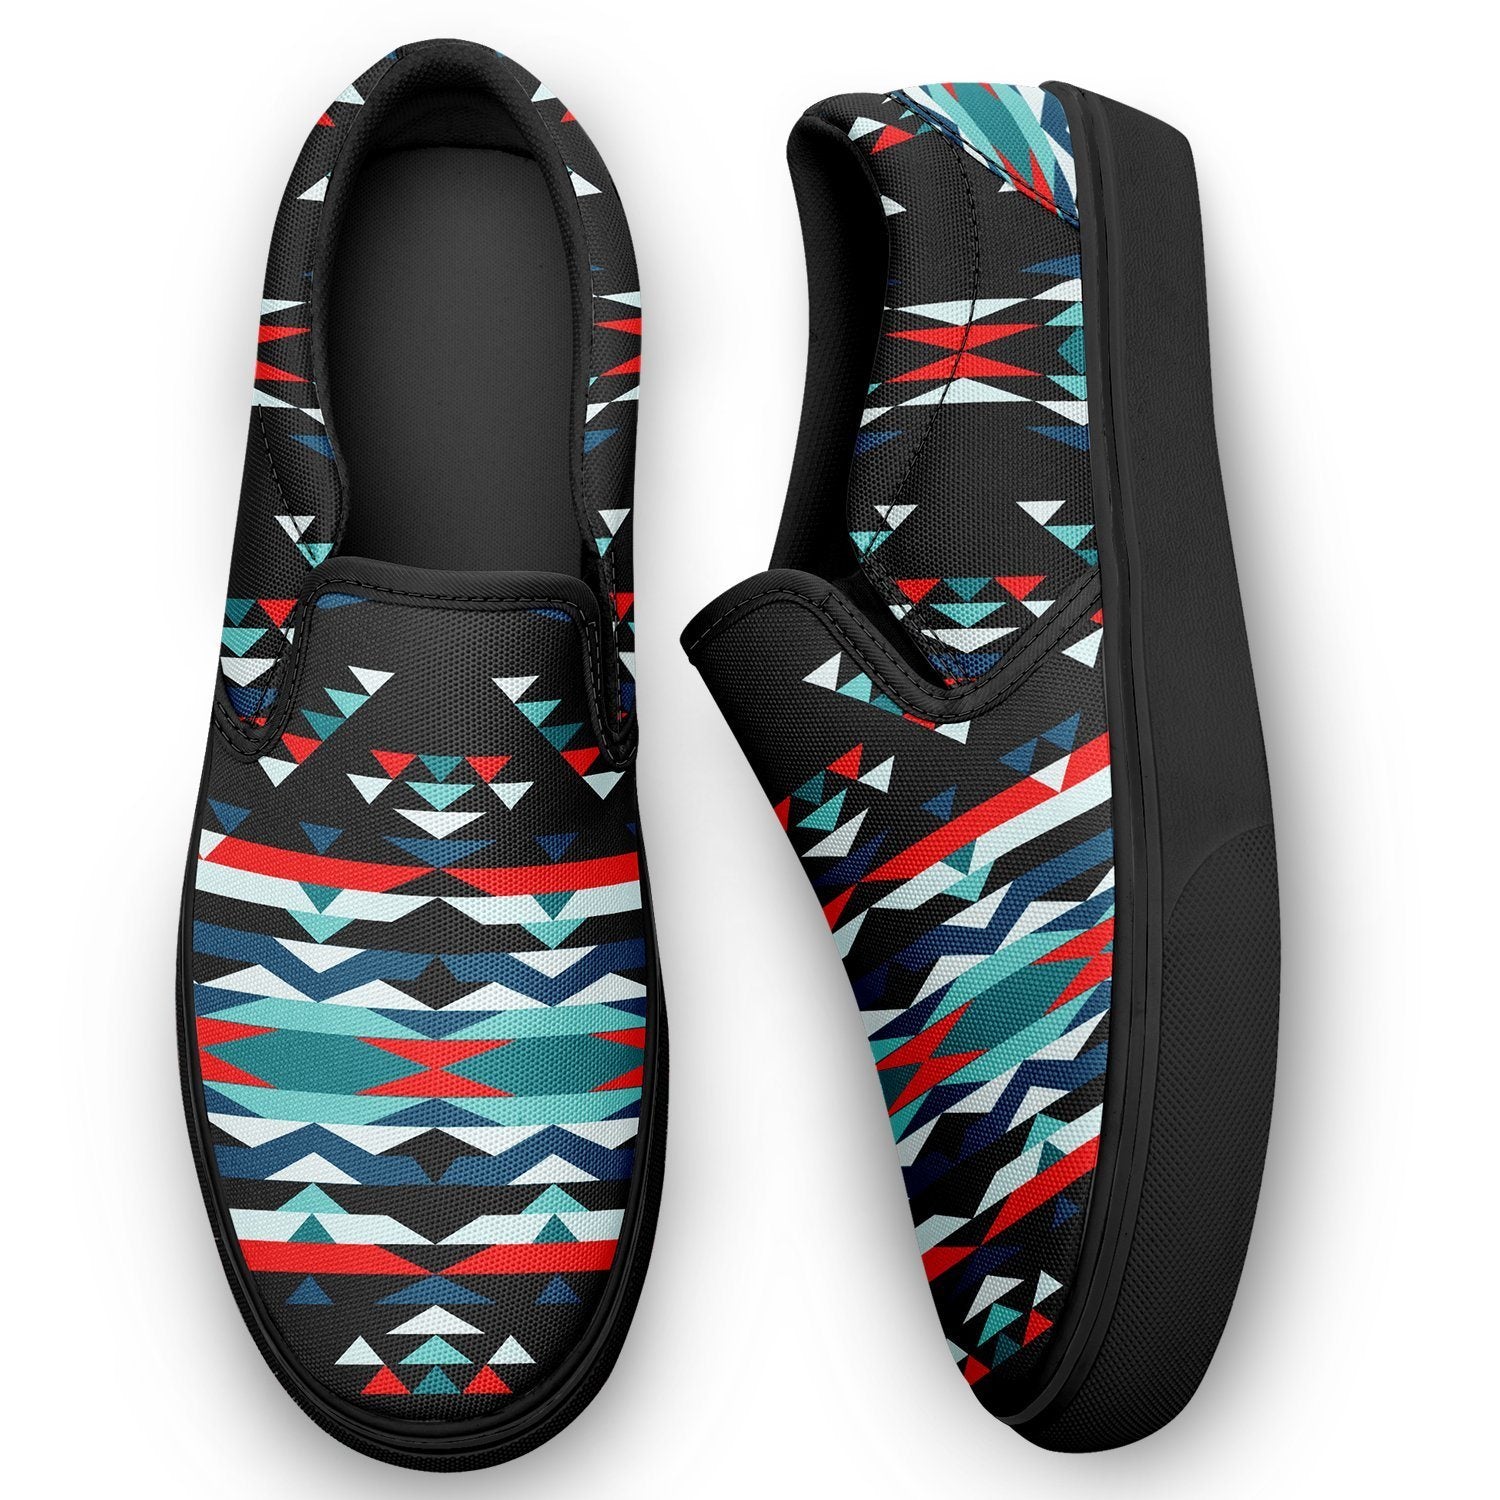 Visions of Peaceful Nights Otoyimm Kid's Canvas Slip On Shoes 49 Dzine 